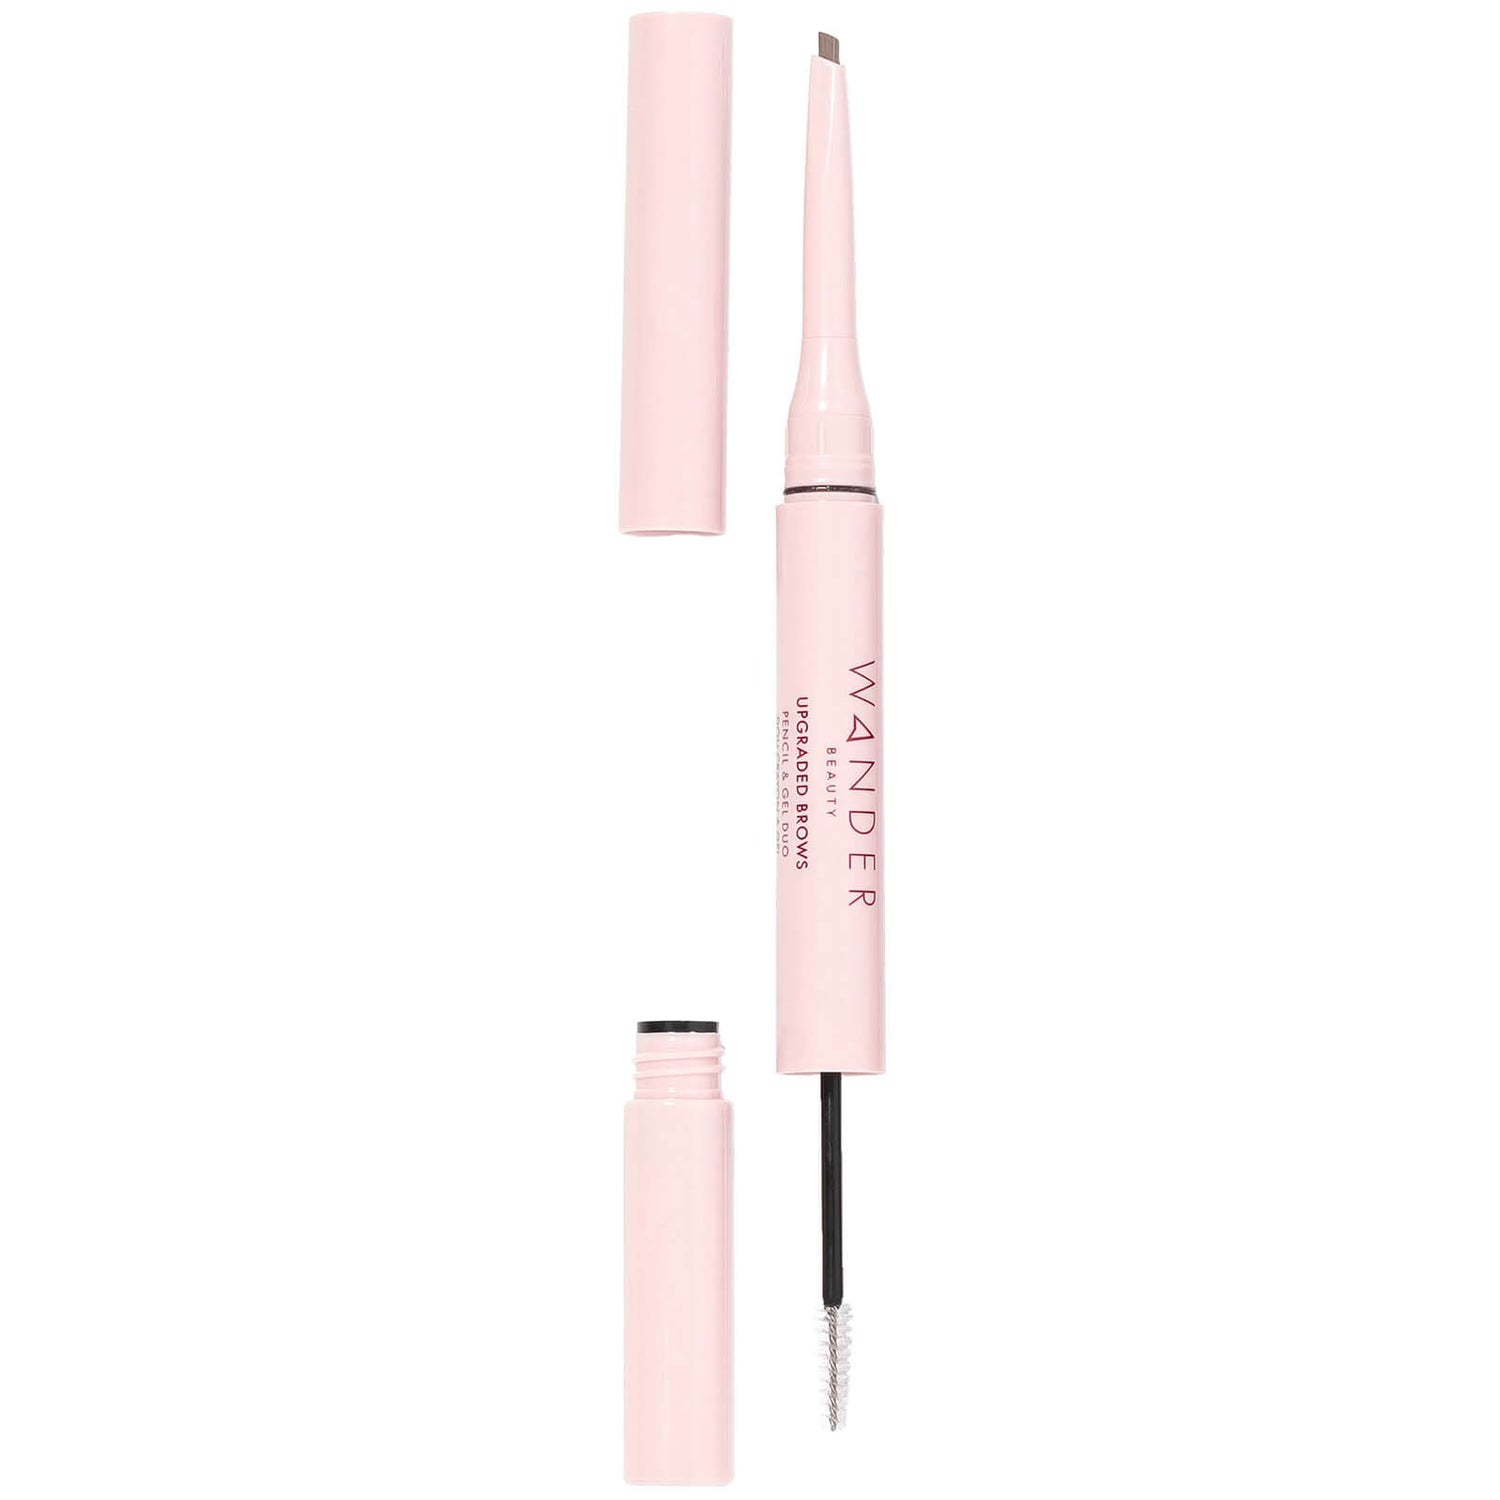 Upgraded Brows Pencil and Gel Duo (Various Shades)